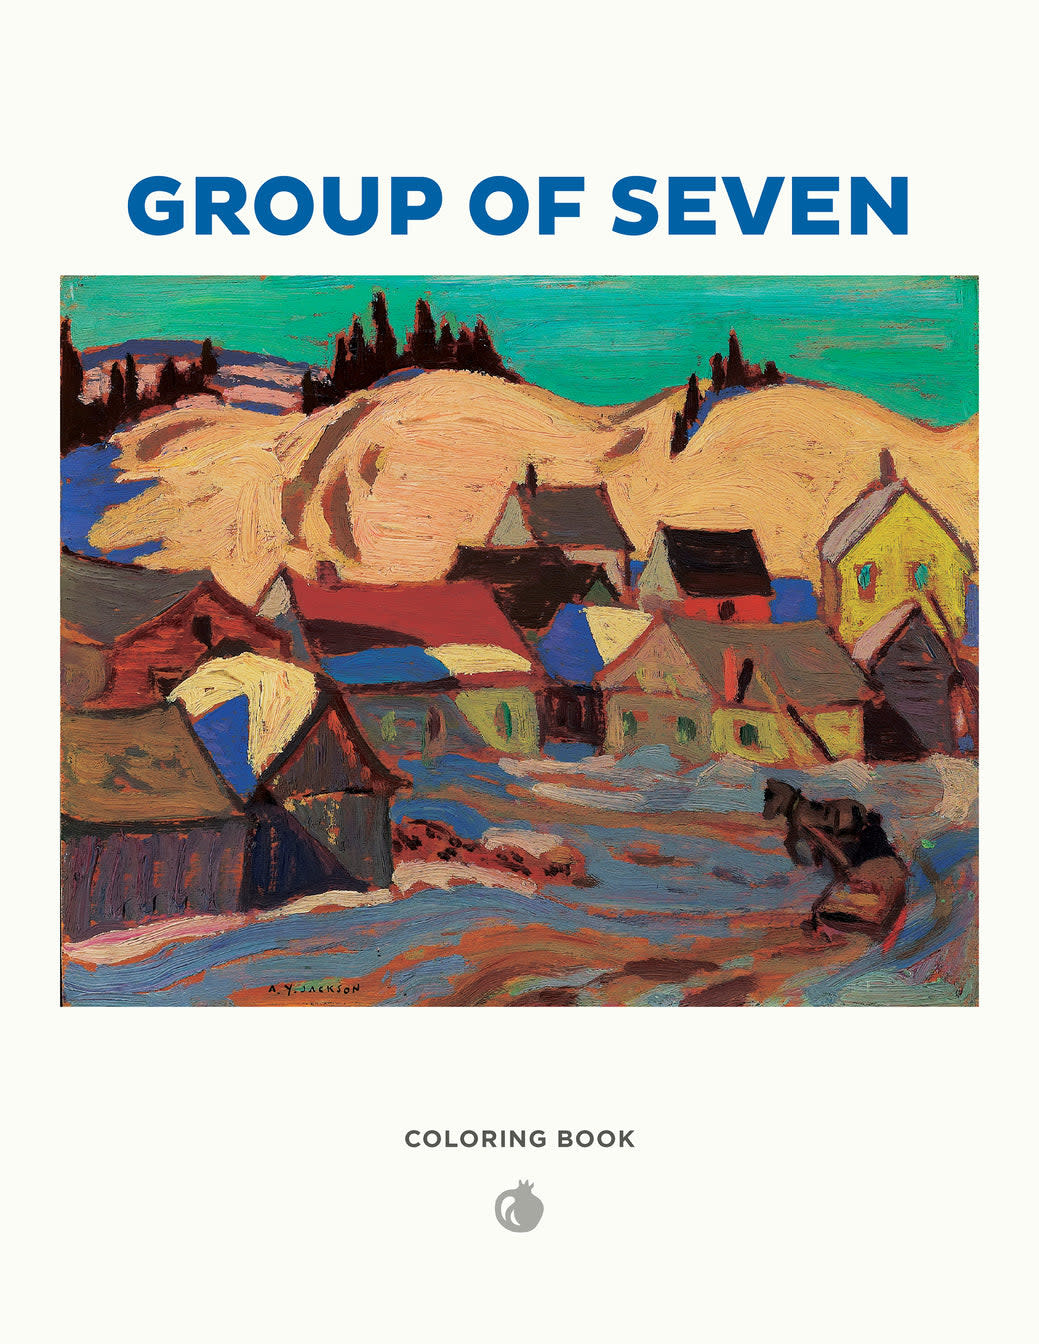 Colouring Book - The Group of Seven